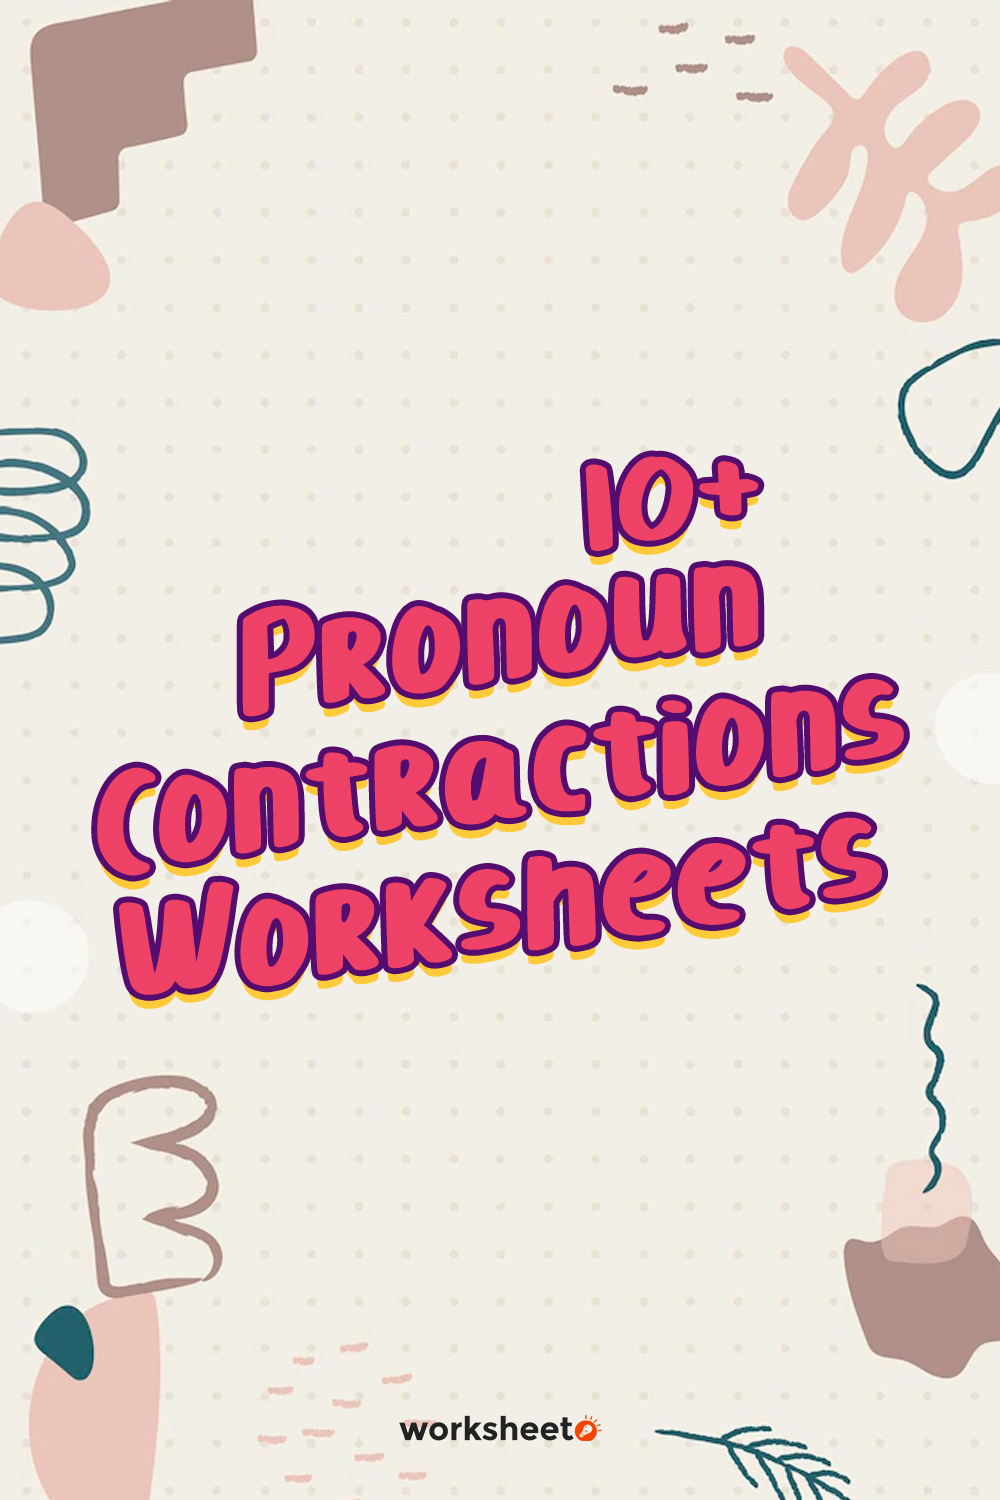 15 Pronoun Contractions Worksheets Worksheeto